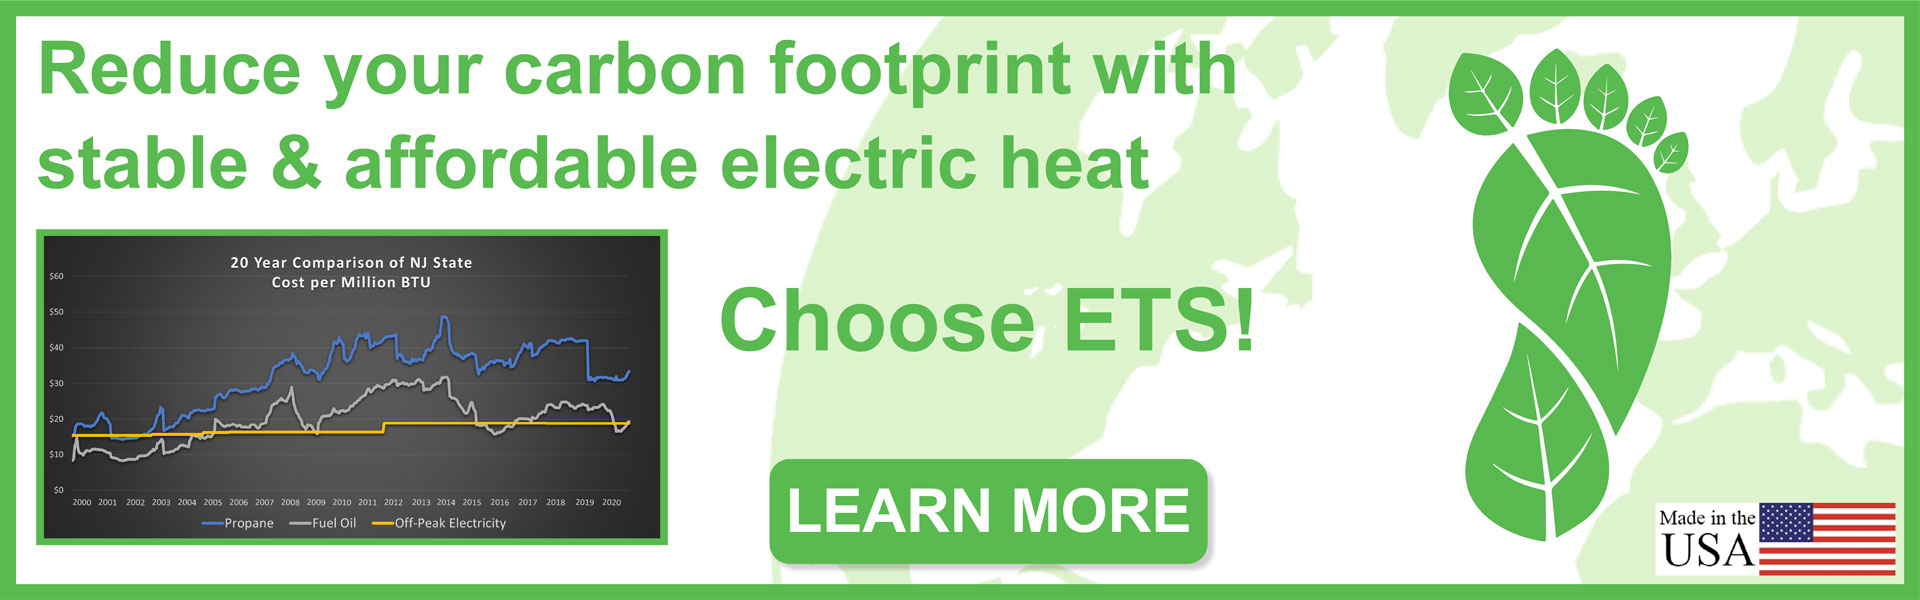 Reduce your carbon footprint with stable & affordable electric heat - Choose ETS!